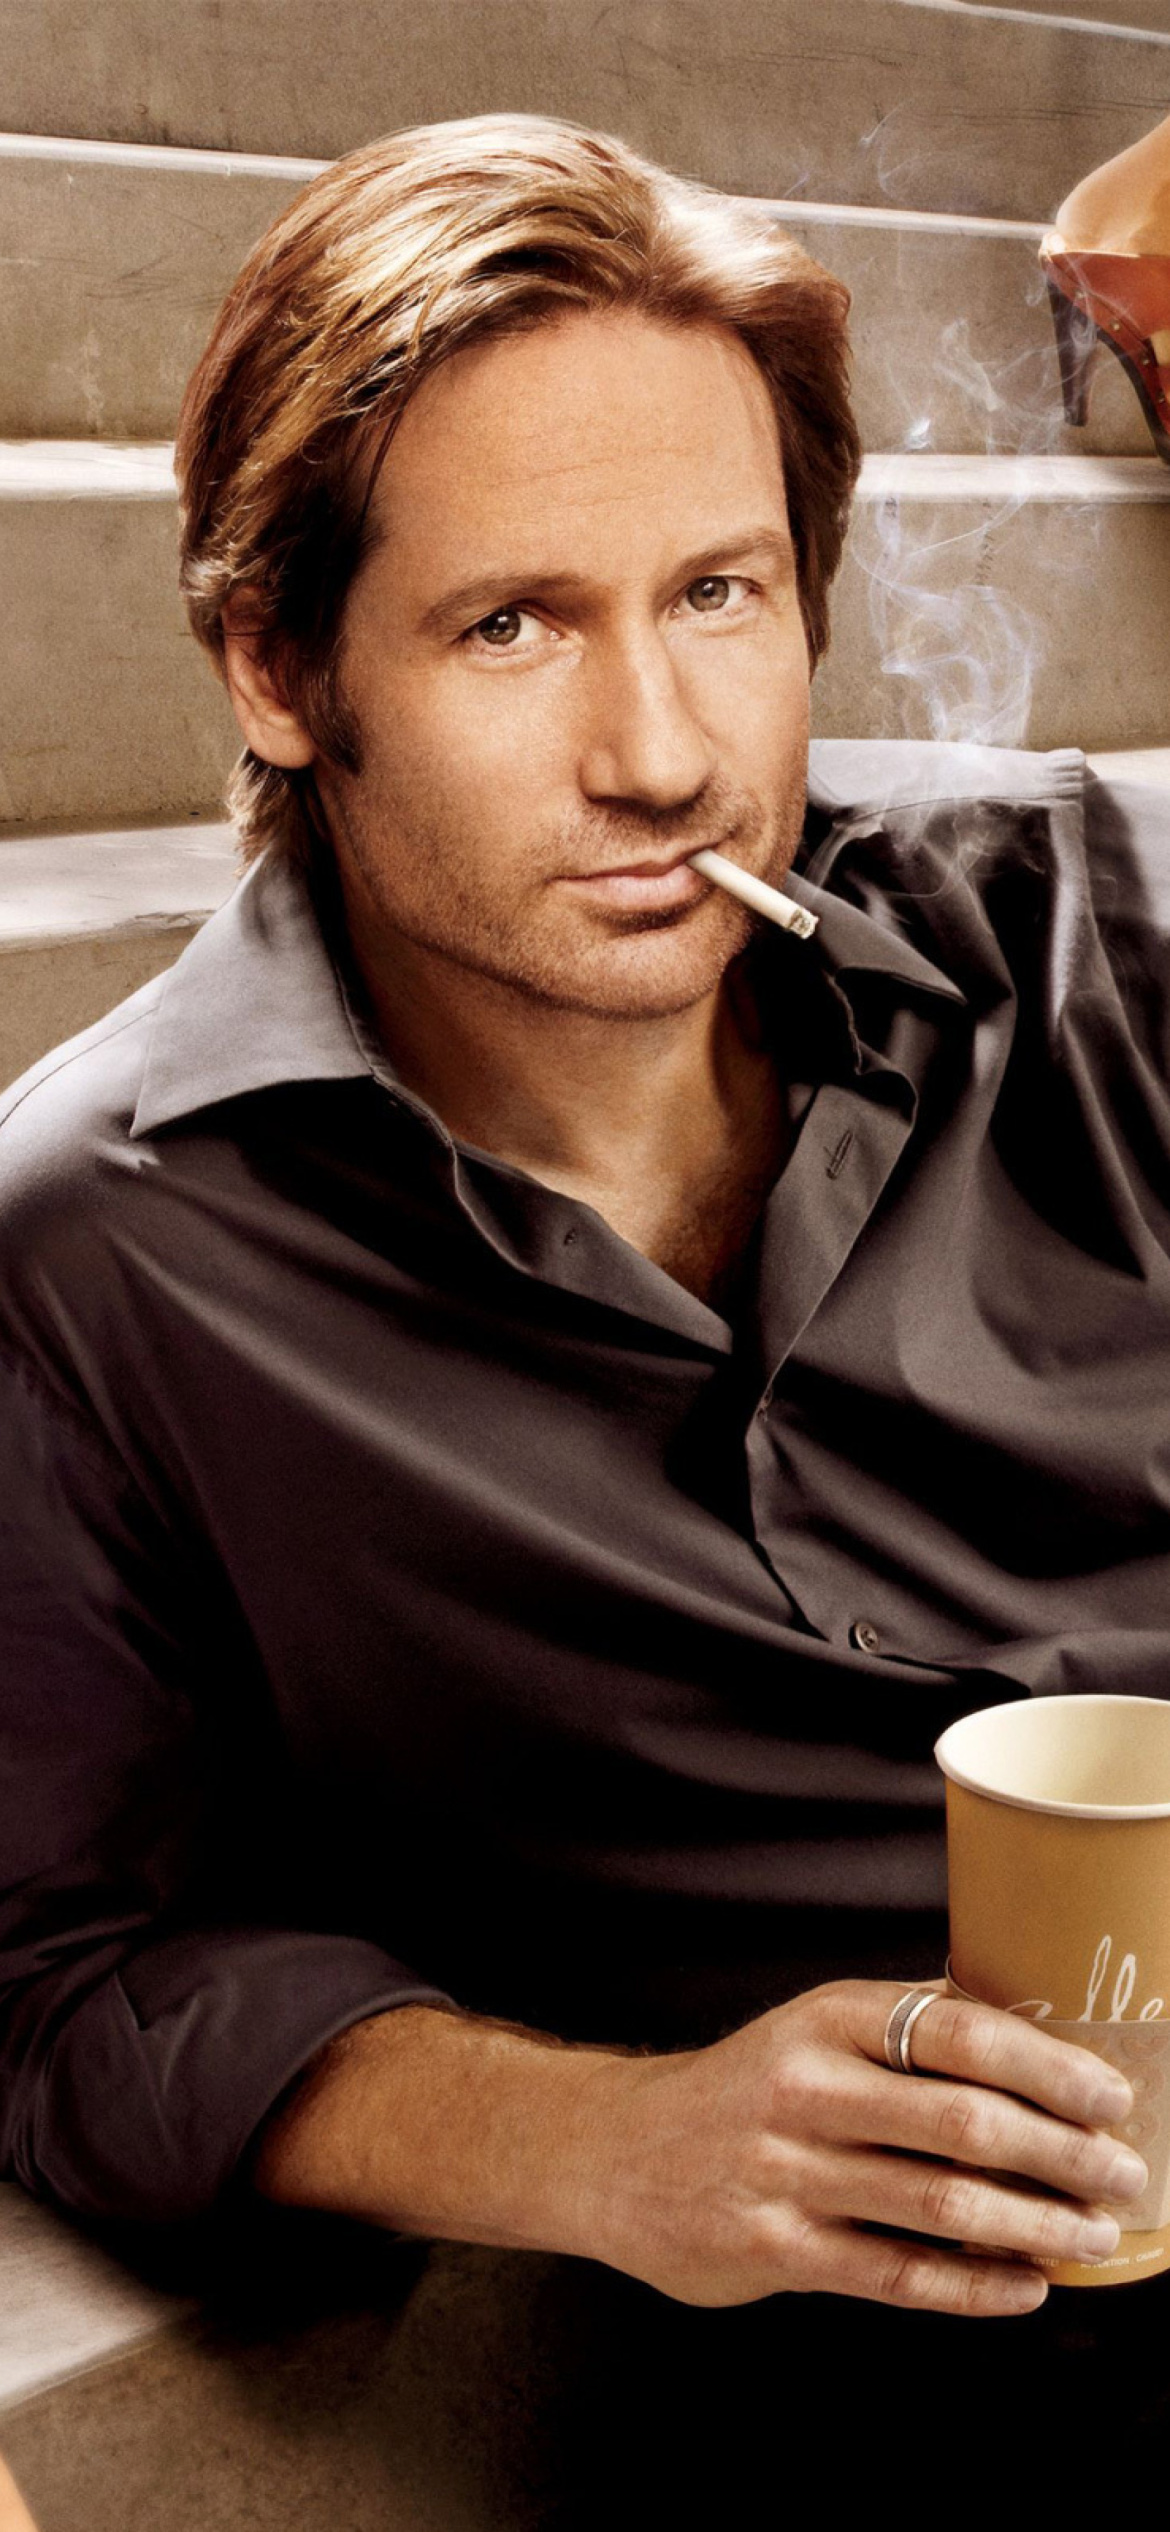 Californication TV Series with David Duchovny wallpaper 1170x2532